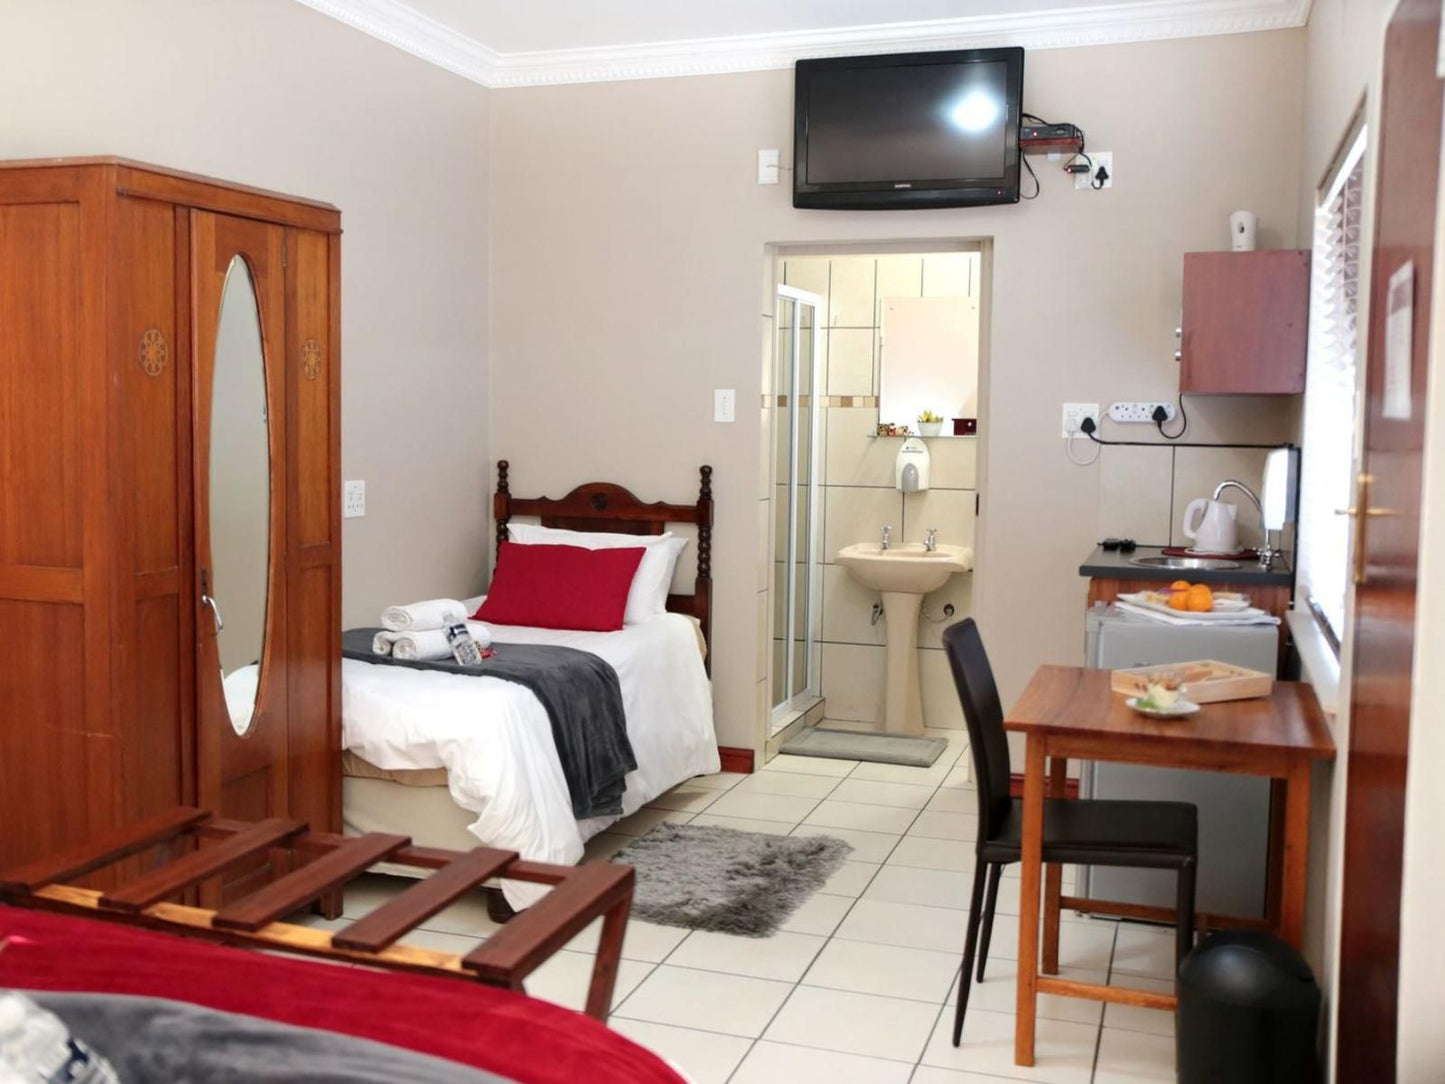 Alucarni Guest House Blydeville Upington Northern Cape South Africa 